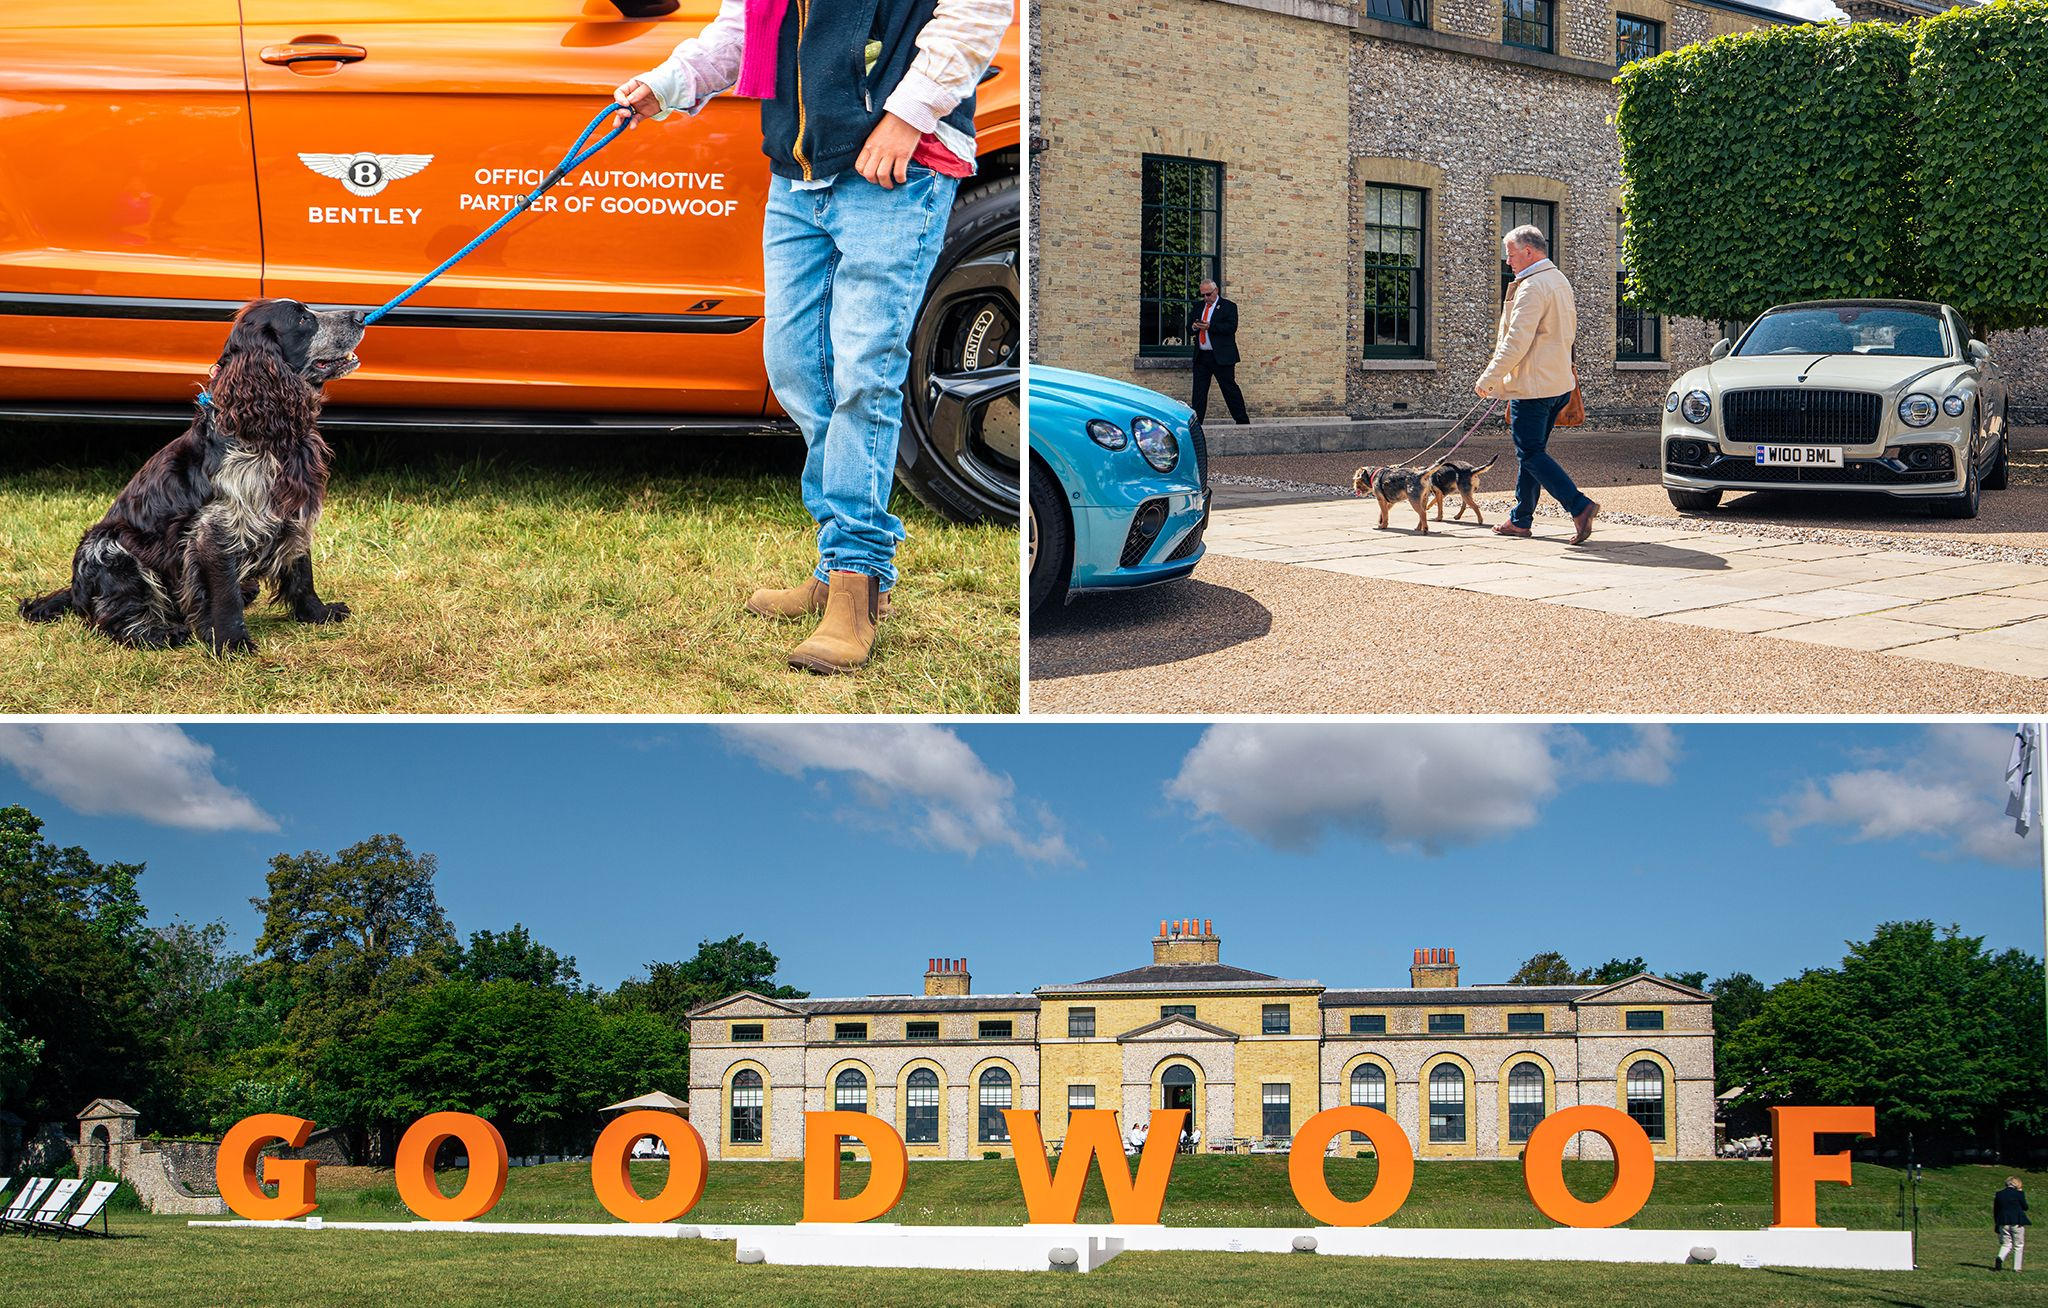 Bentley raises the Woof at Goodwood’s festival for dogs